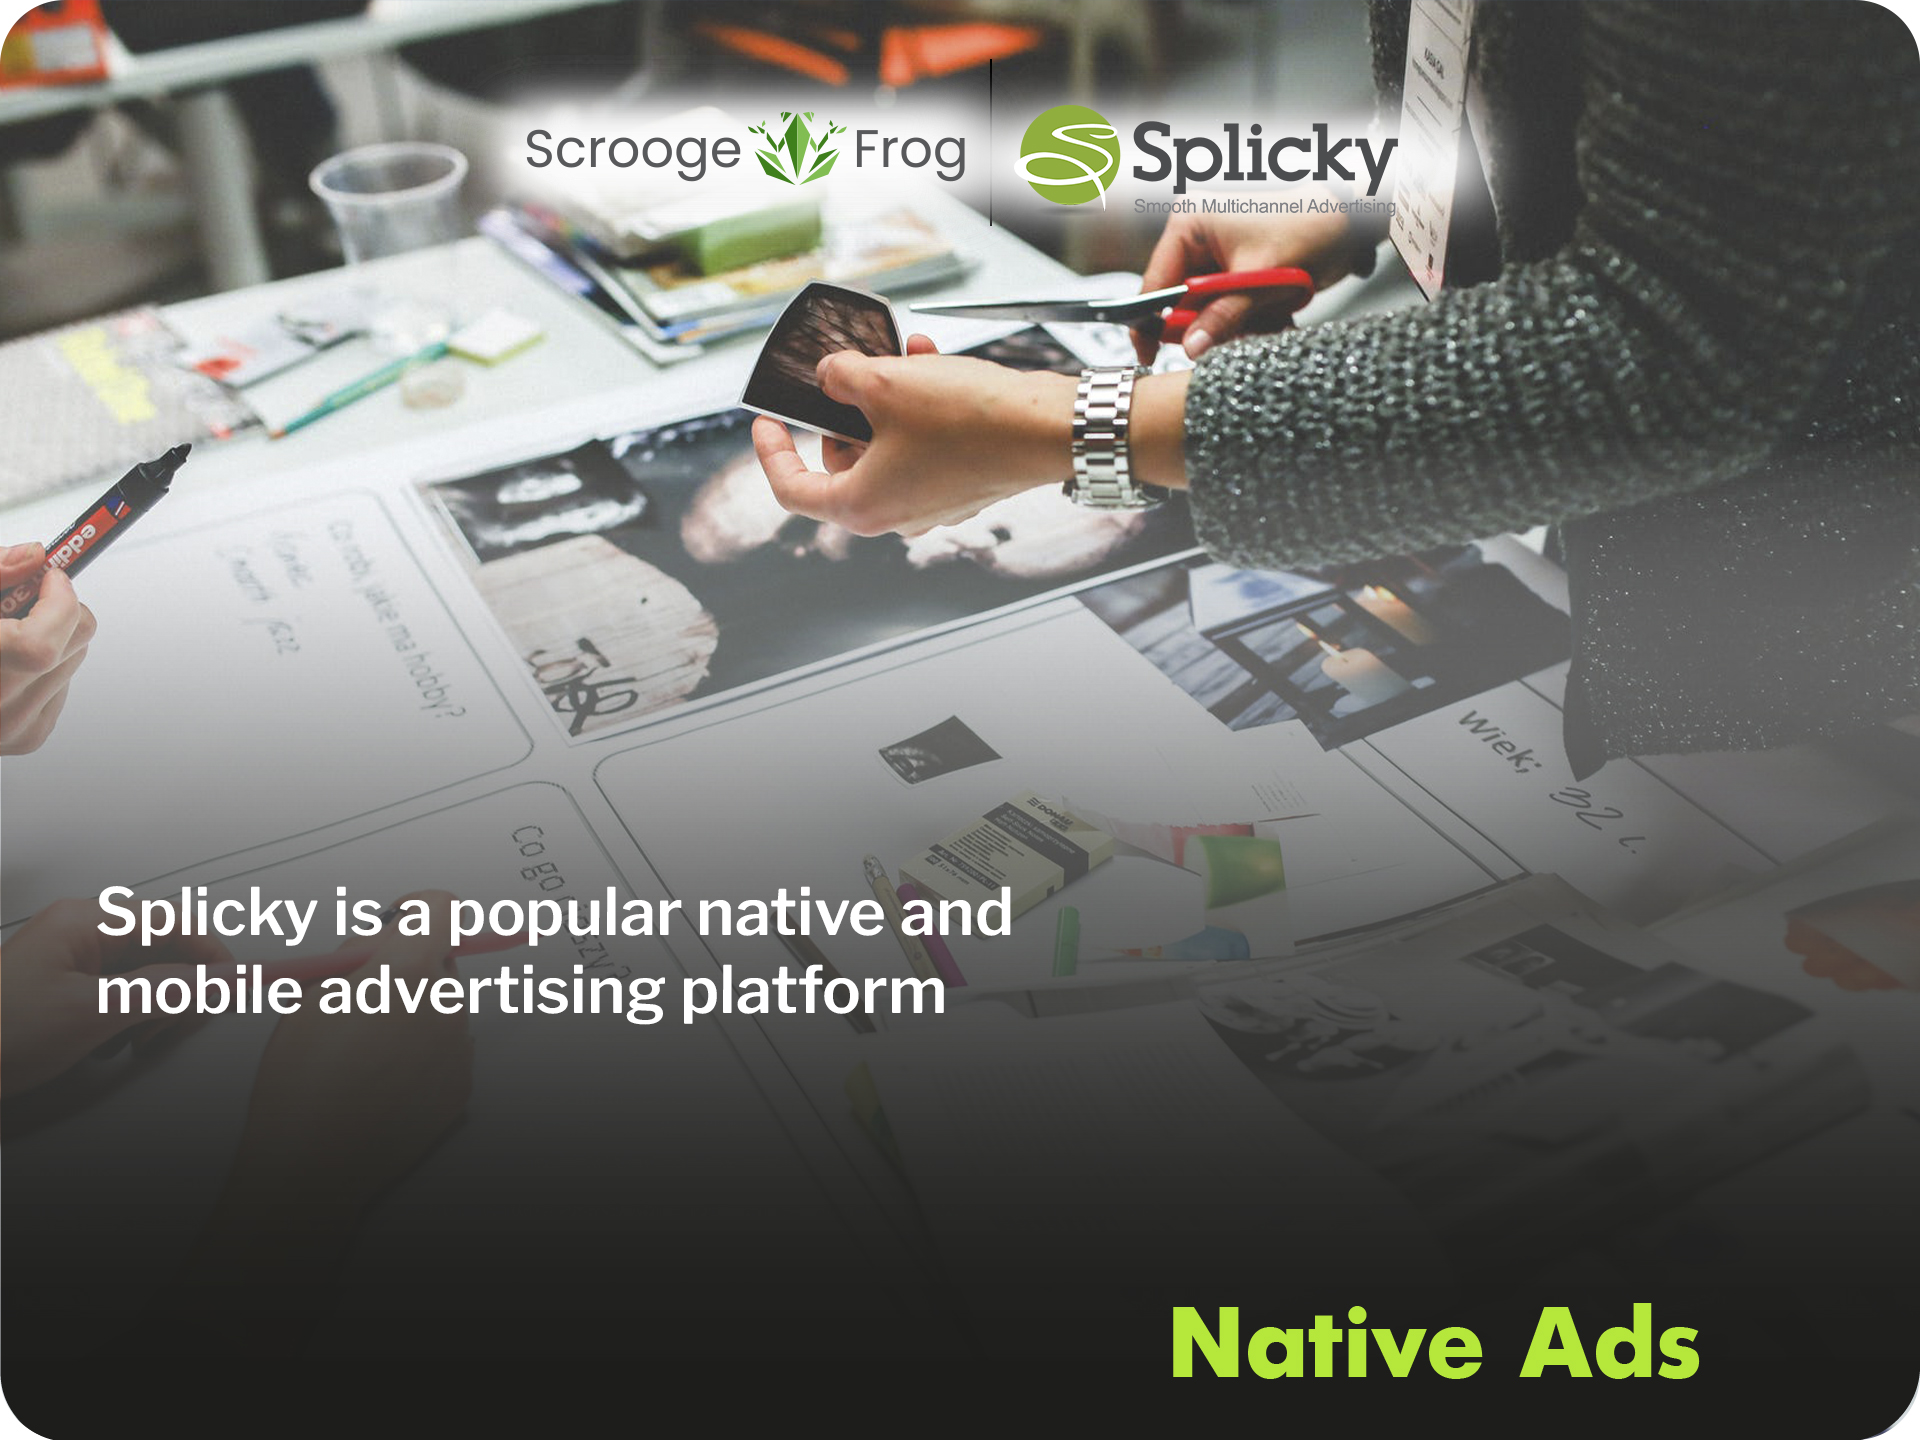 Splicky is a popular native and mobile advertising platform